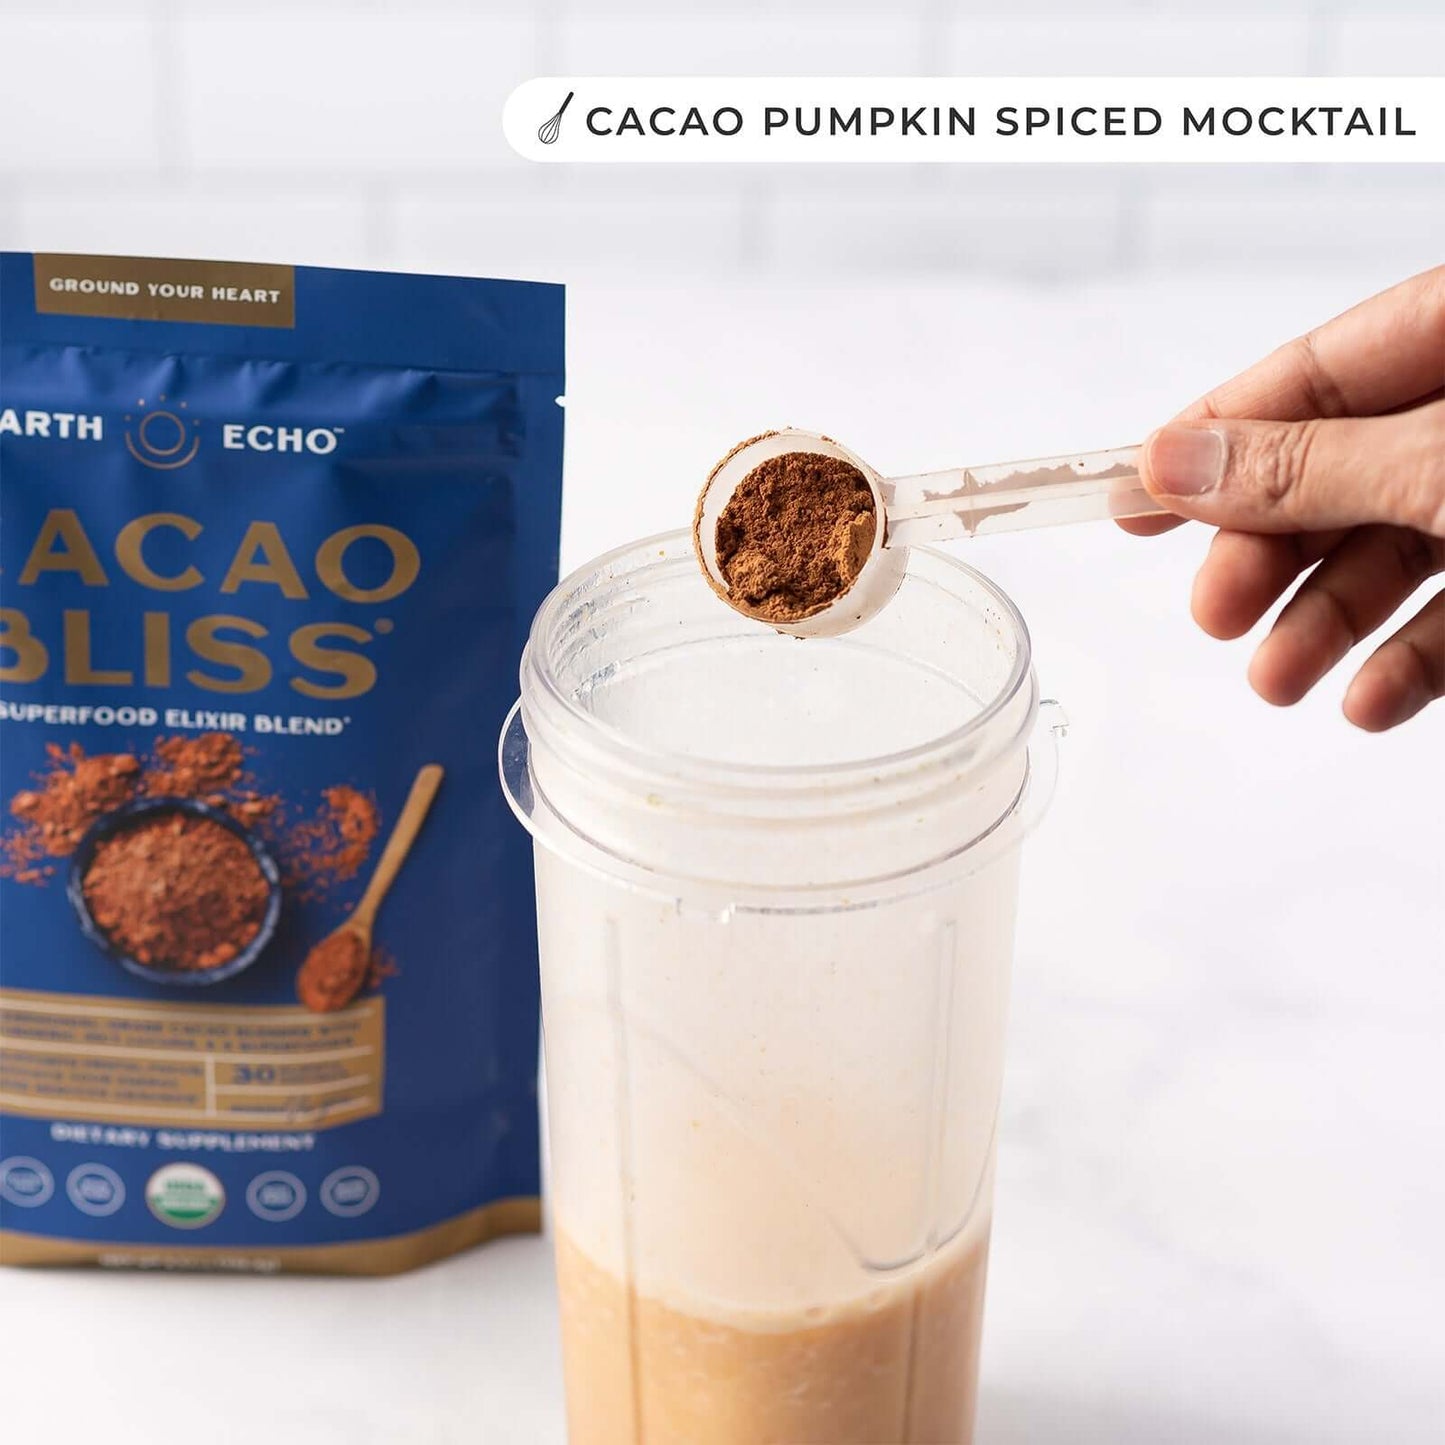 Cacao Bliss & FREE Golden Superfood Bliss